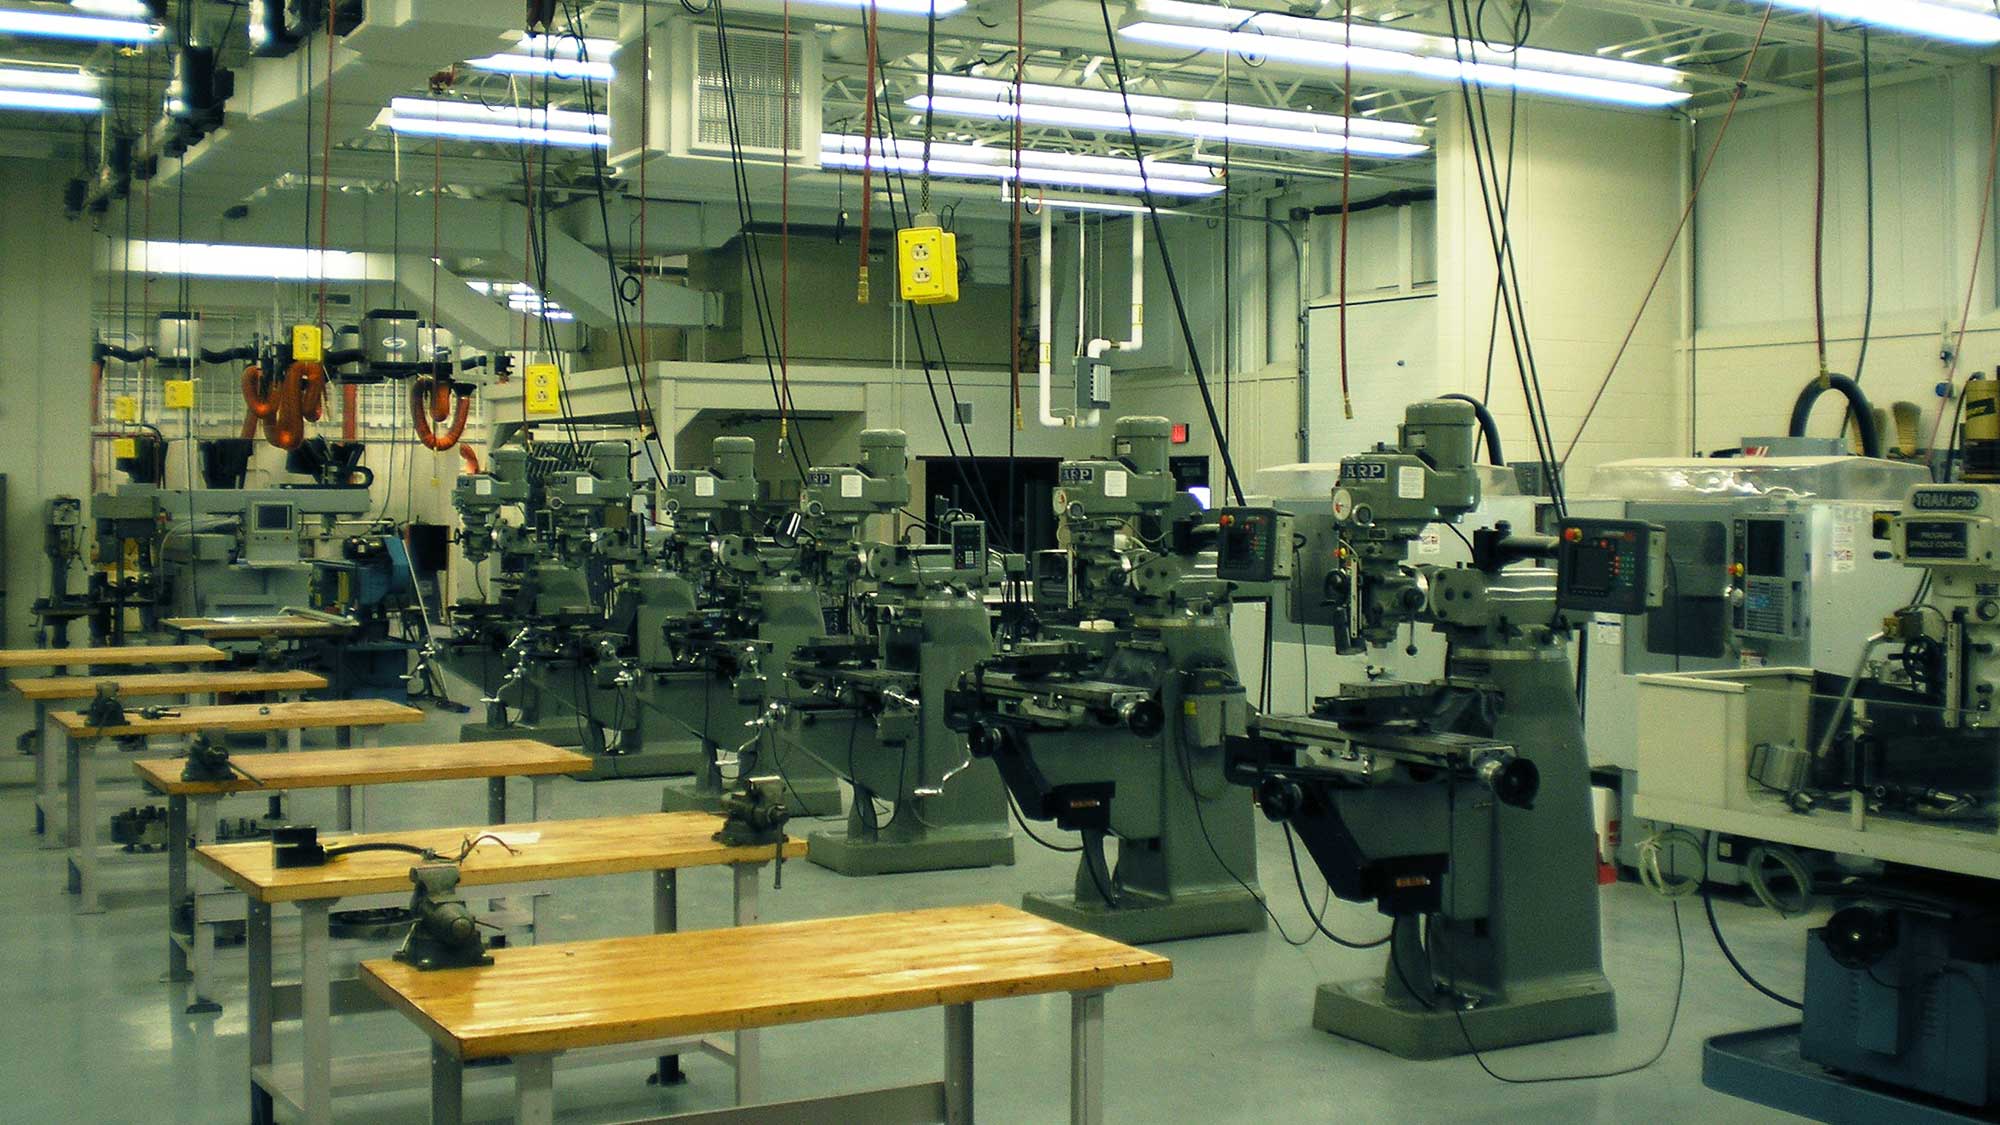 MERCER COUNTY CAREER AND TECHNICAL CENTER